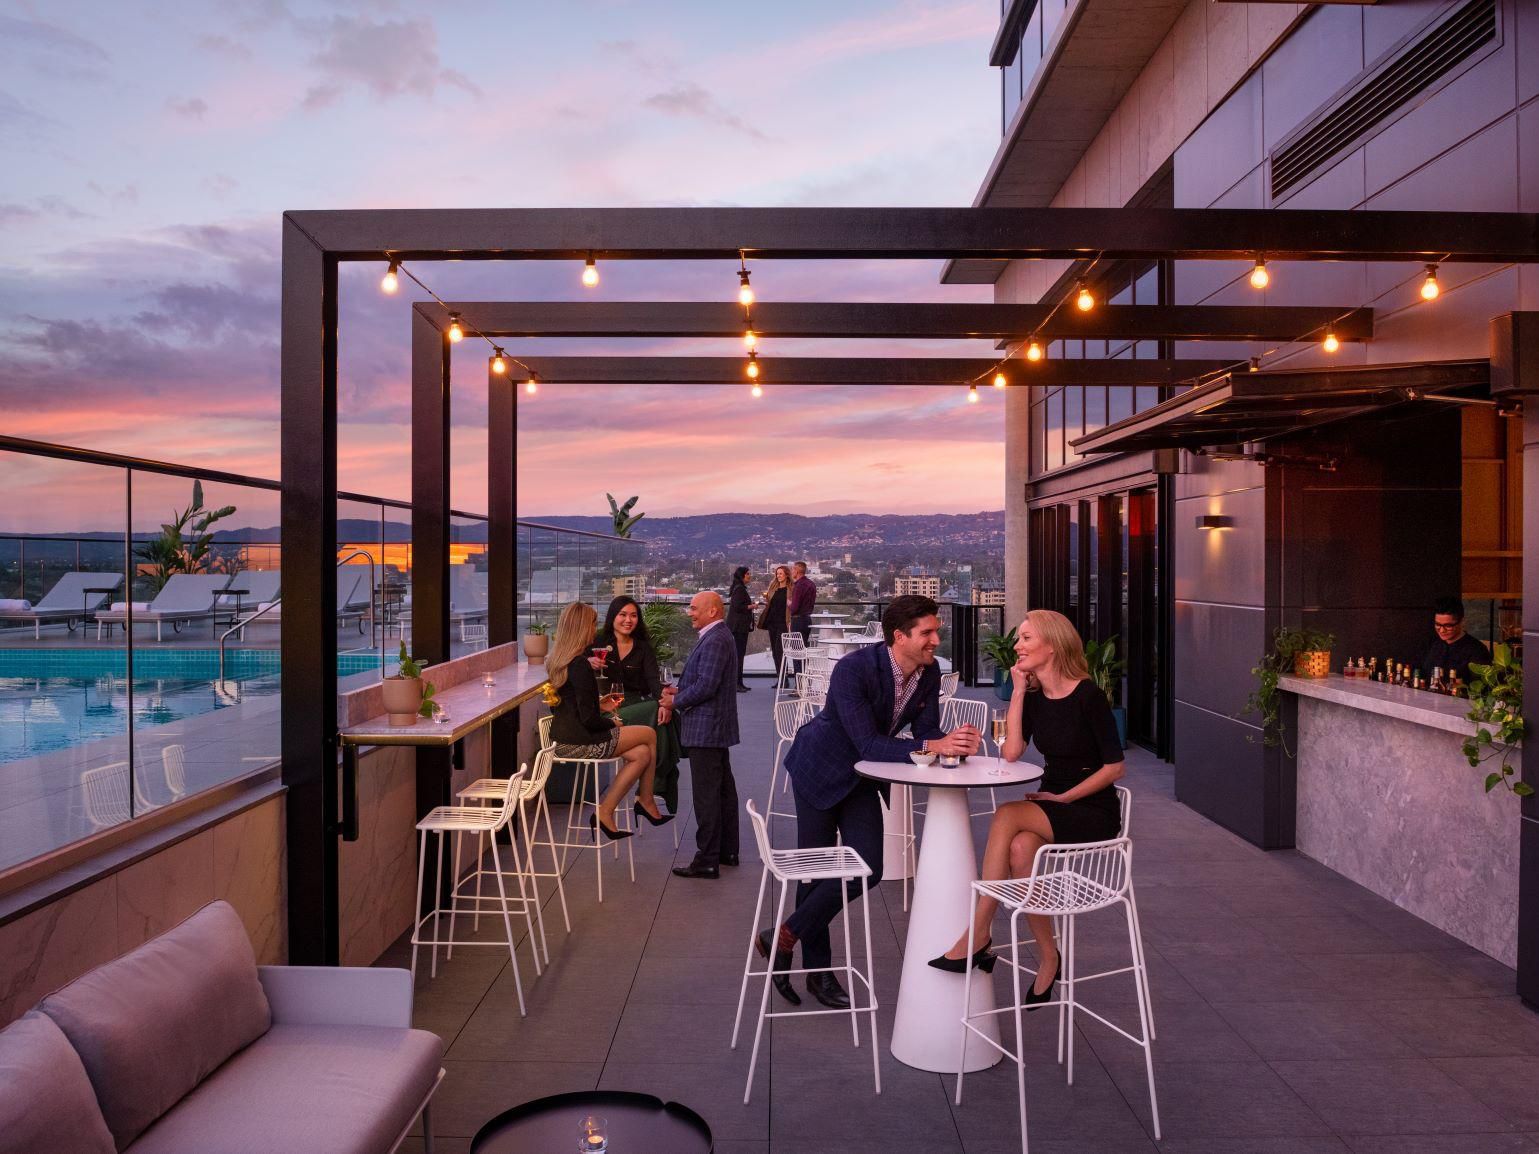 Glide from 9-to-5 to 5-to-9 at the hottest new bar in Adelaide. Sip a cocktail poolside and taste Japanese small plates. Meet colleagues, friends or fly solo with the city lights and Adelaide Hills as your backdrop. 